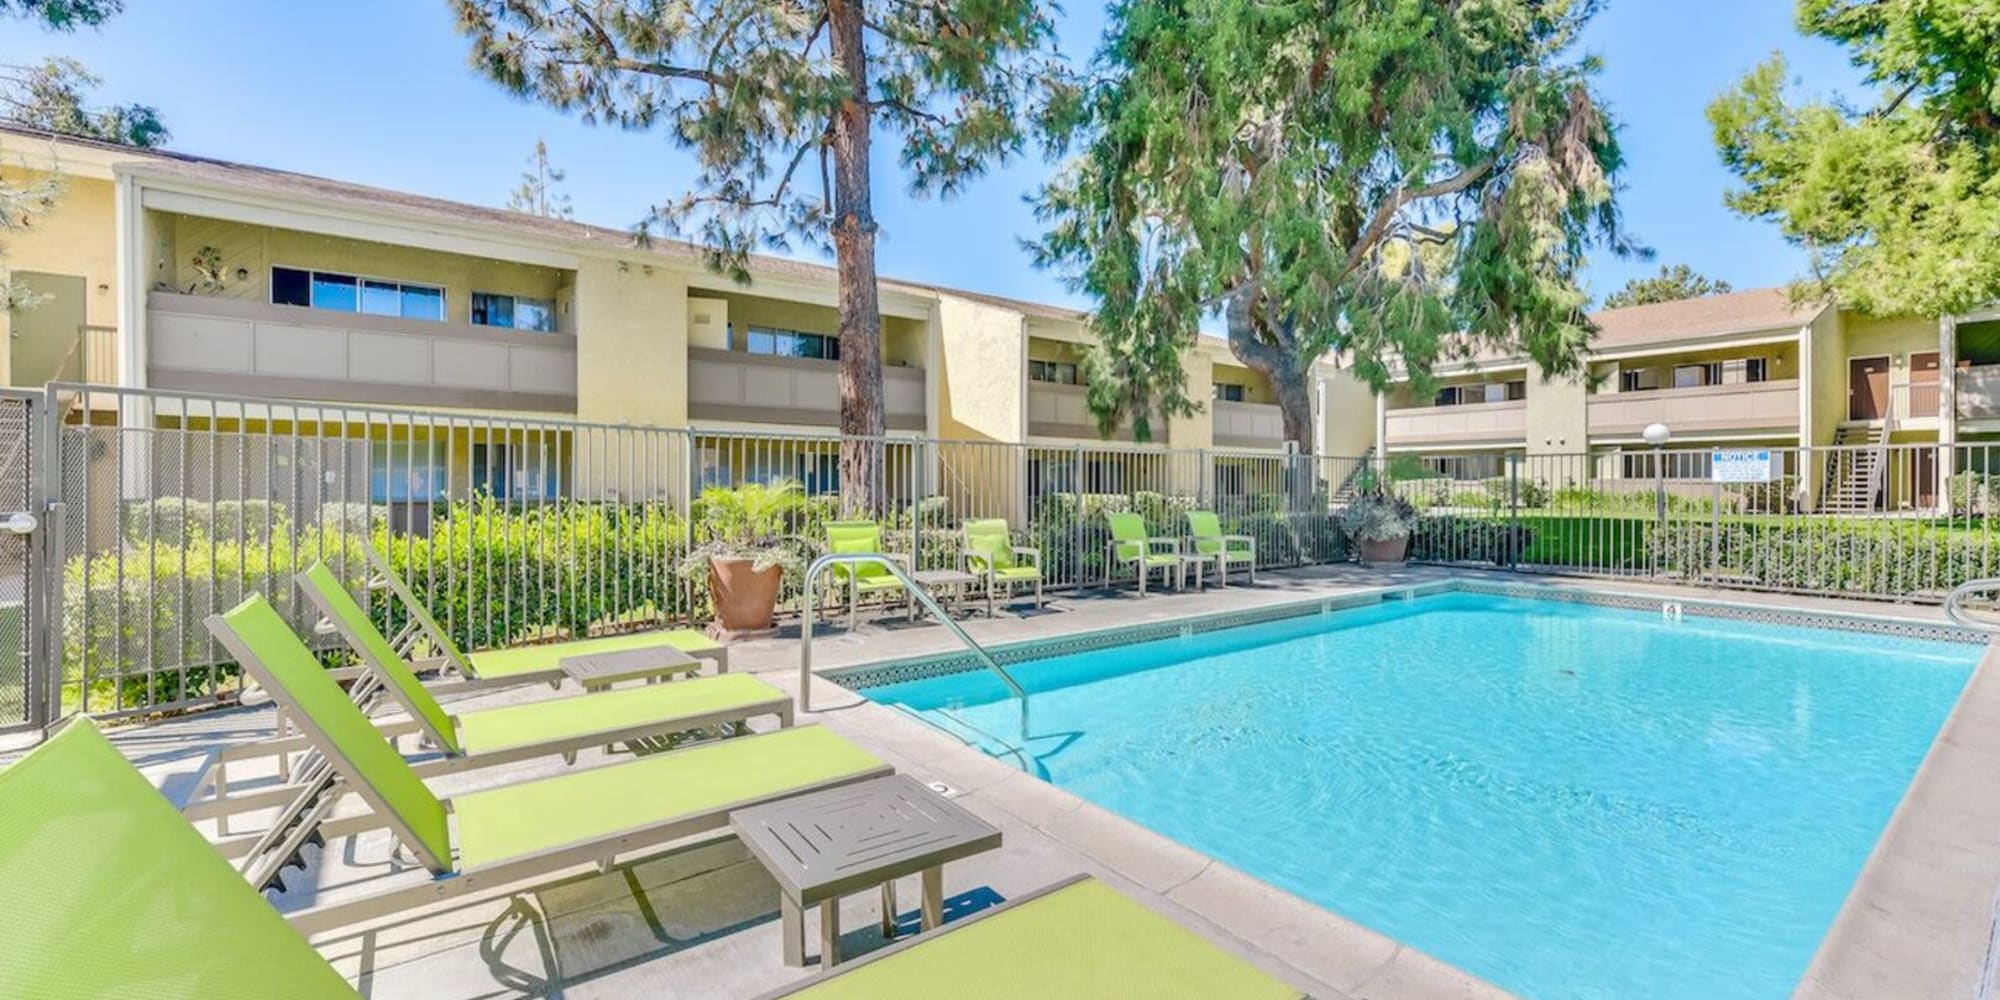 Luxurious swimming pool and outdoor amenities at Torrey Pines Apartment Homes in West Covina, California